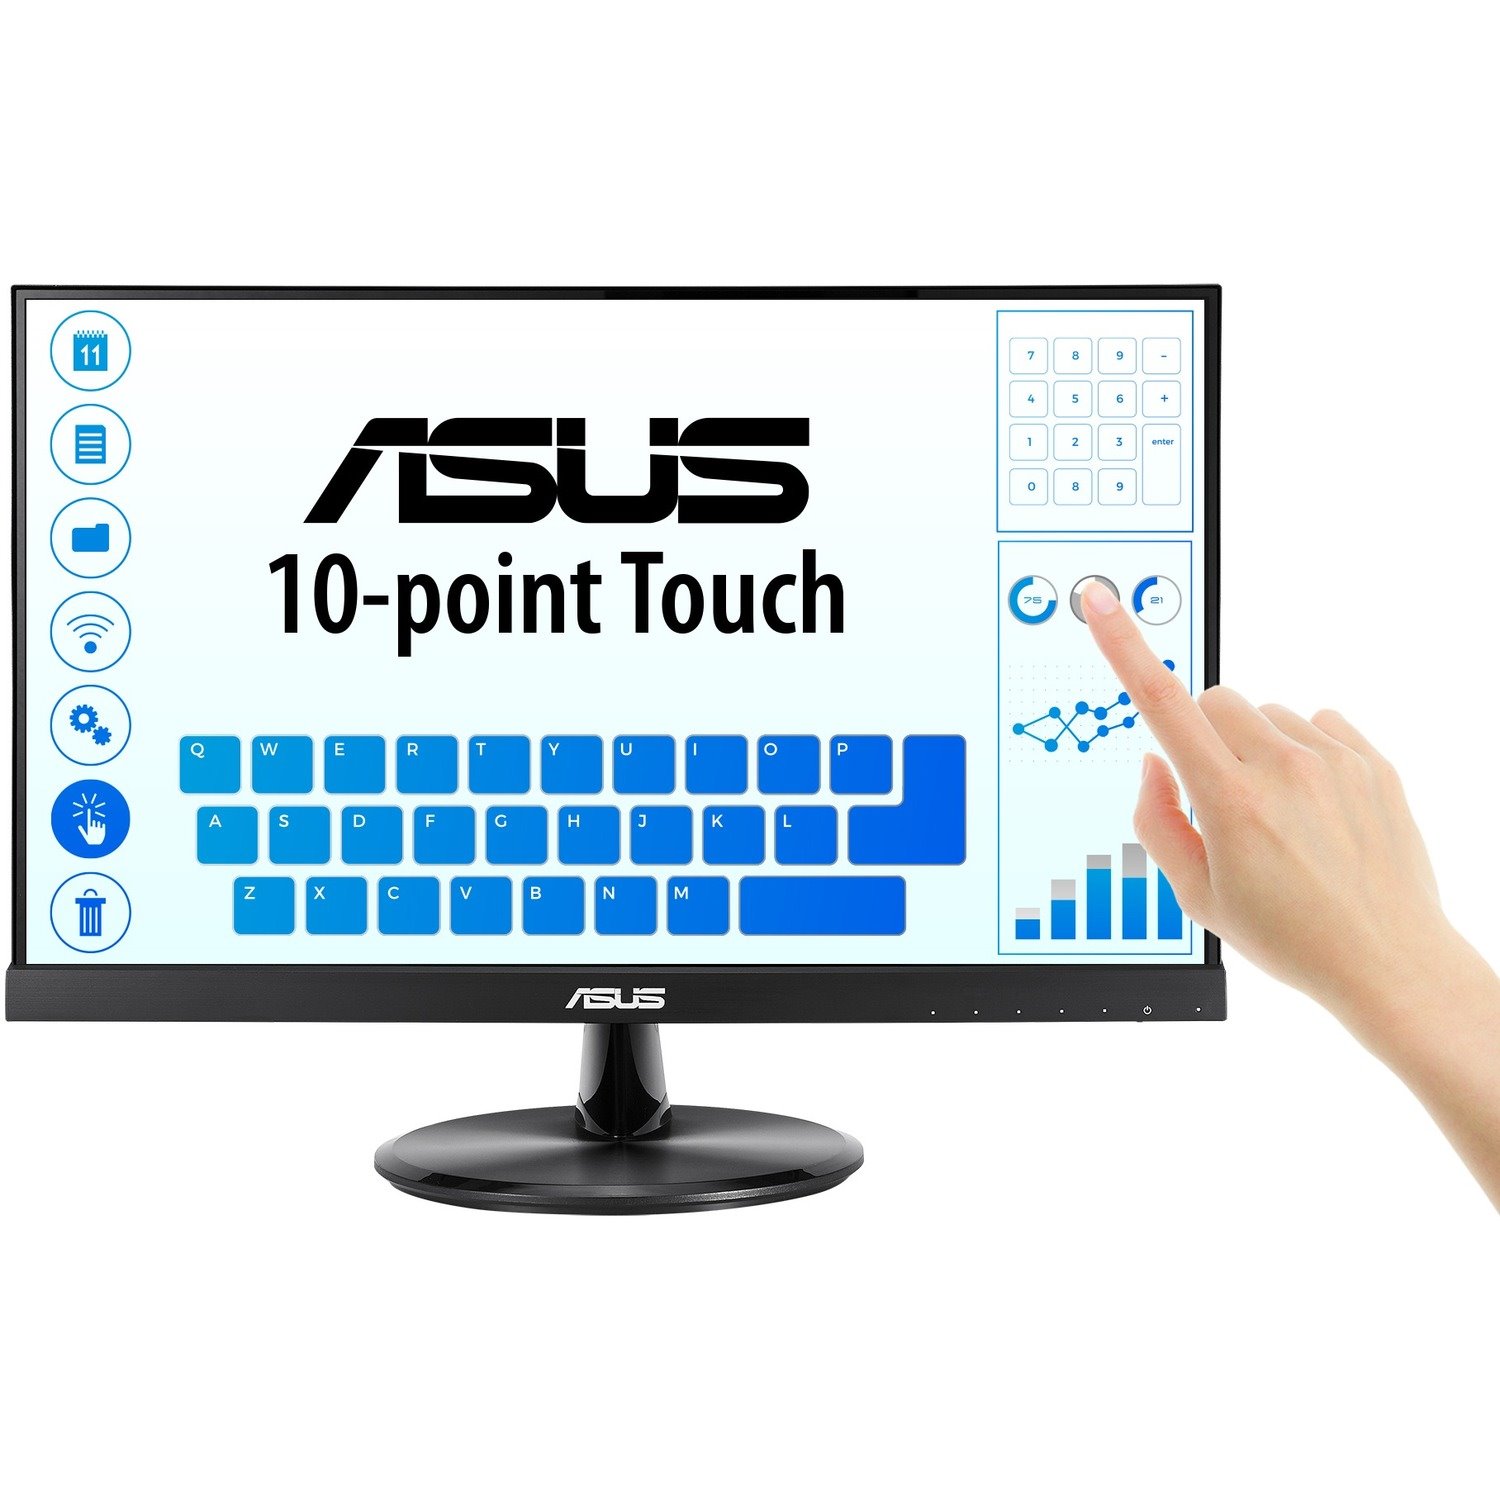 Asus VT229H 54.6 cm (21.5") LCD Touchscreen Monitor - 16:9 - 5 ms GTG